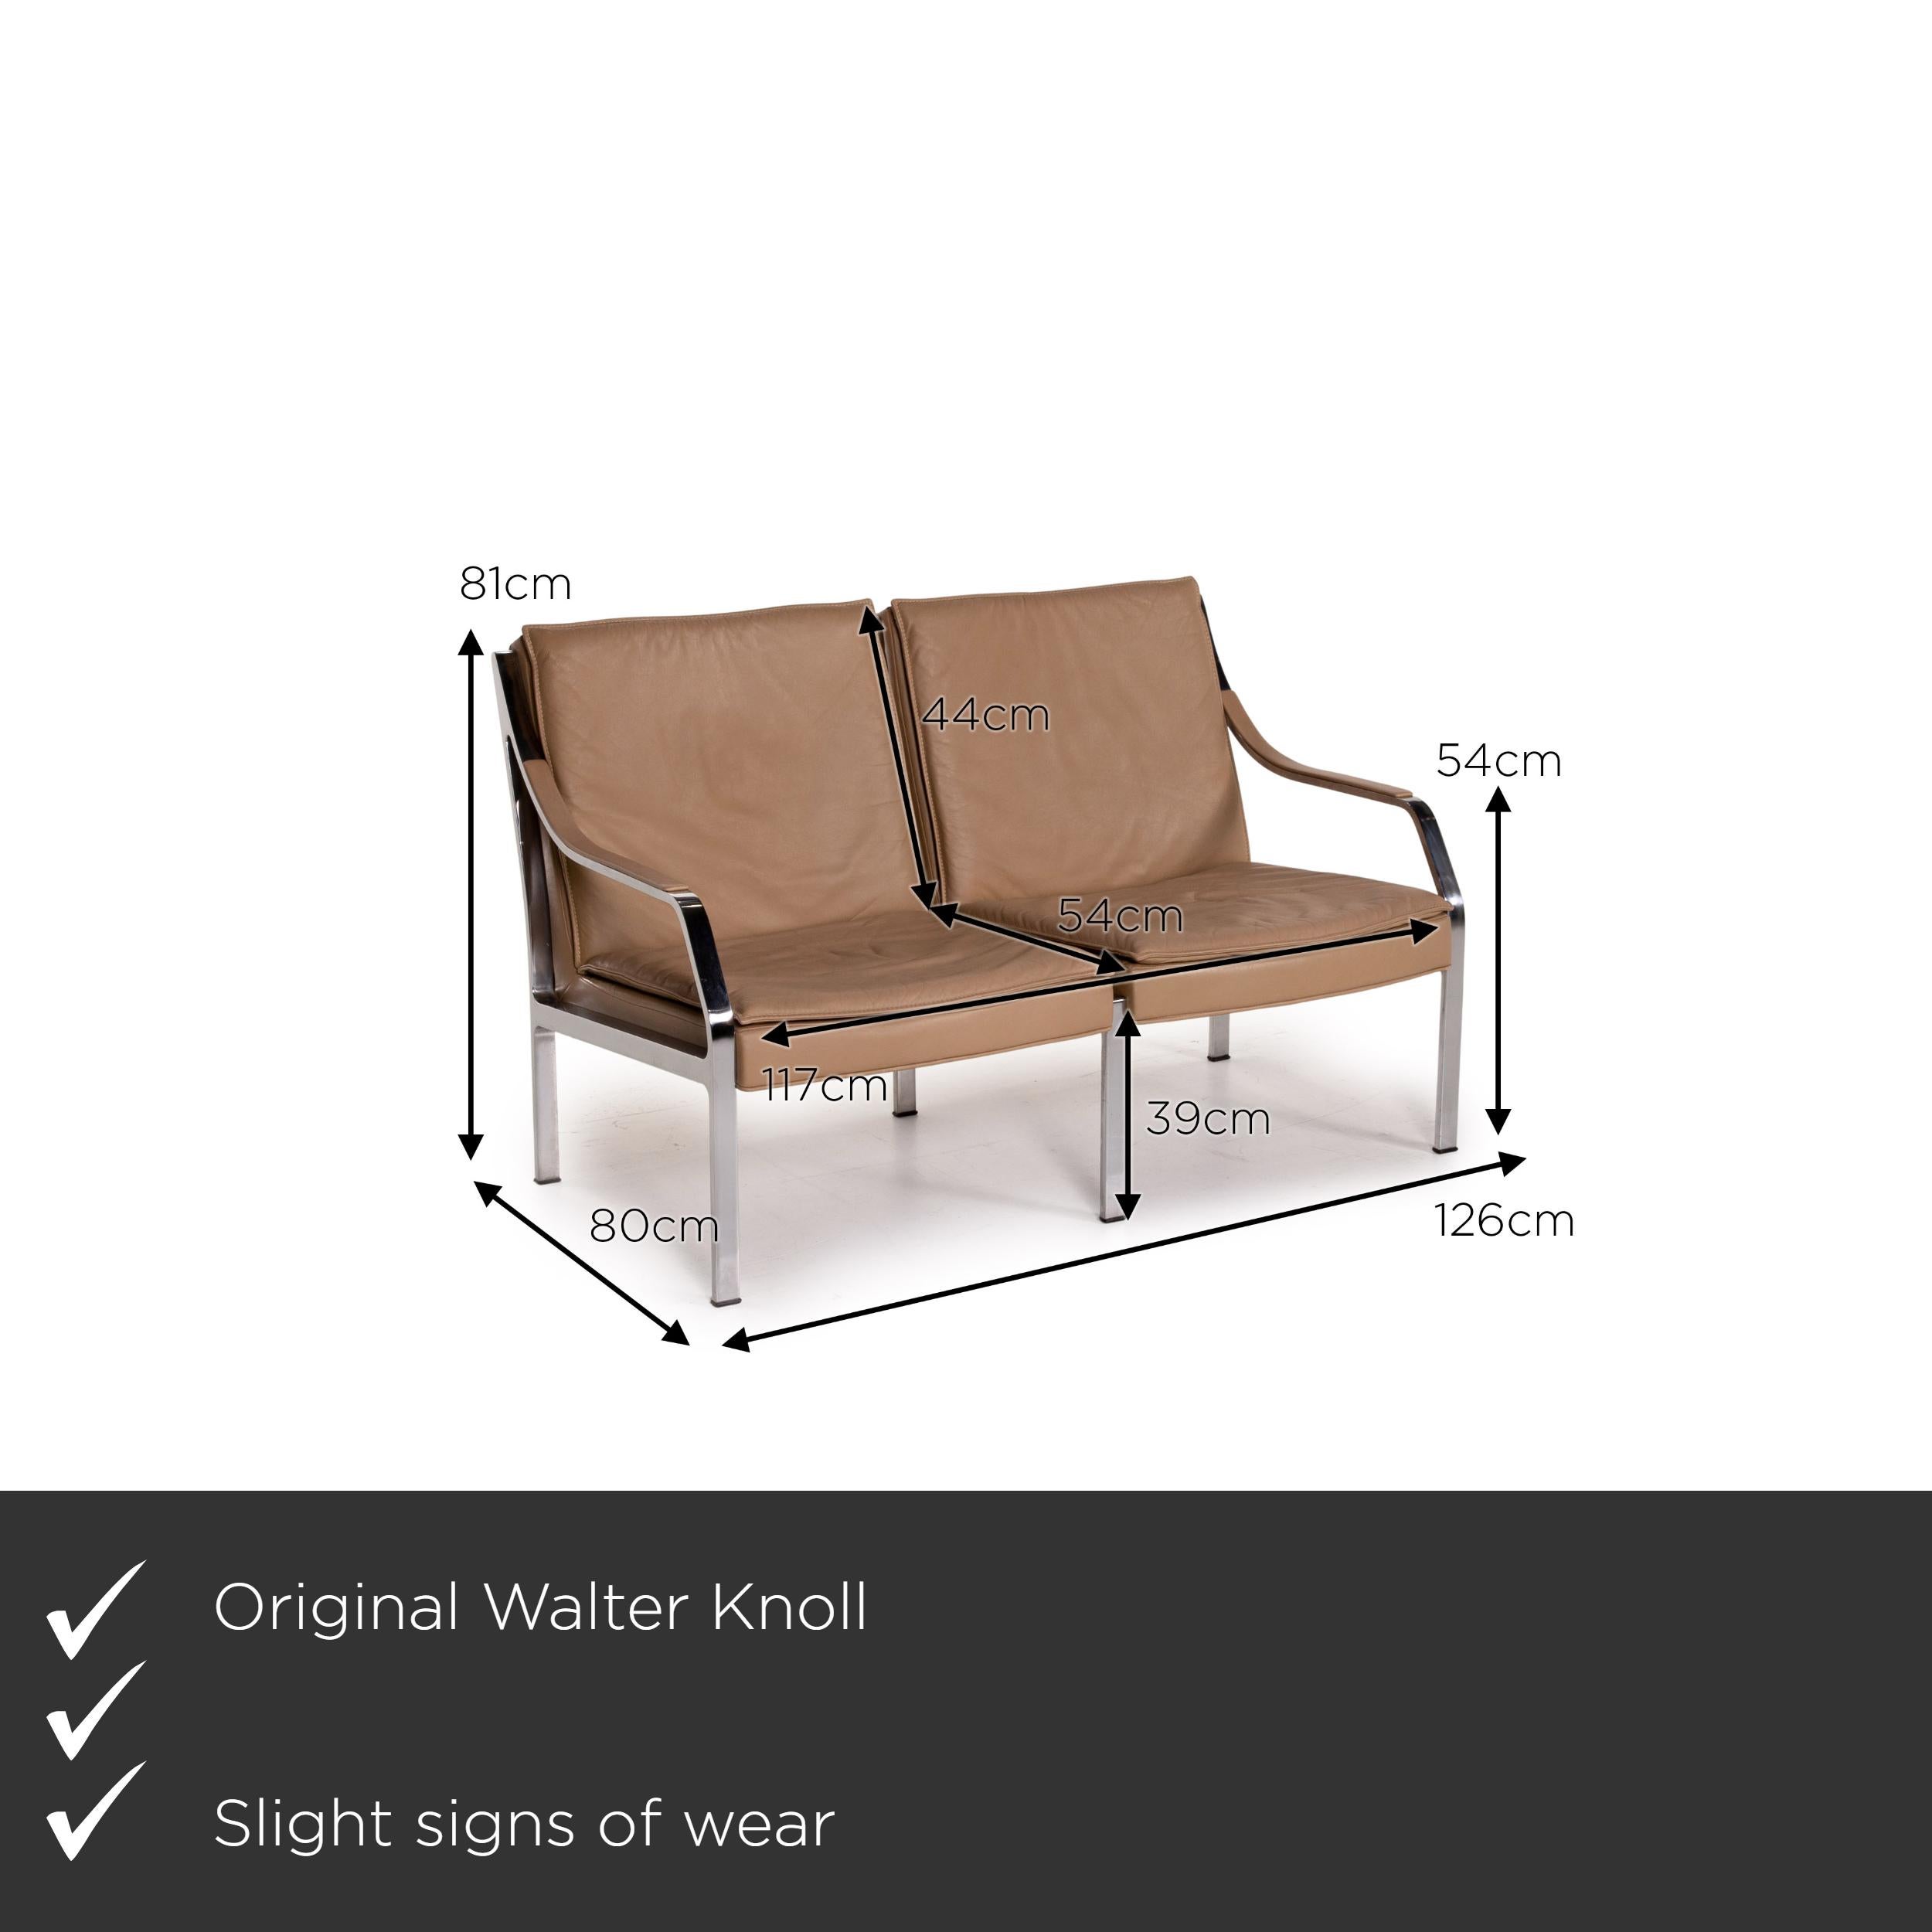 We present to you a Walter Knoll leather sofa beige brown two-seater couch.
 SKU: #15786-c2
 

 Product measurements in centimeters:
 

Depth 80
Width 126
Height 81
Seat height 39
Rest height 54
Seat depth 54
Seat width 117
Back height